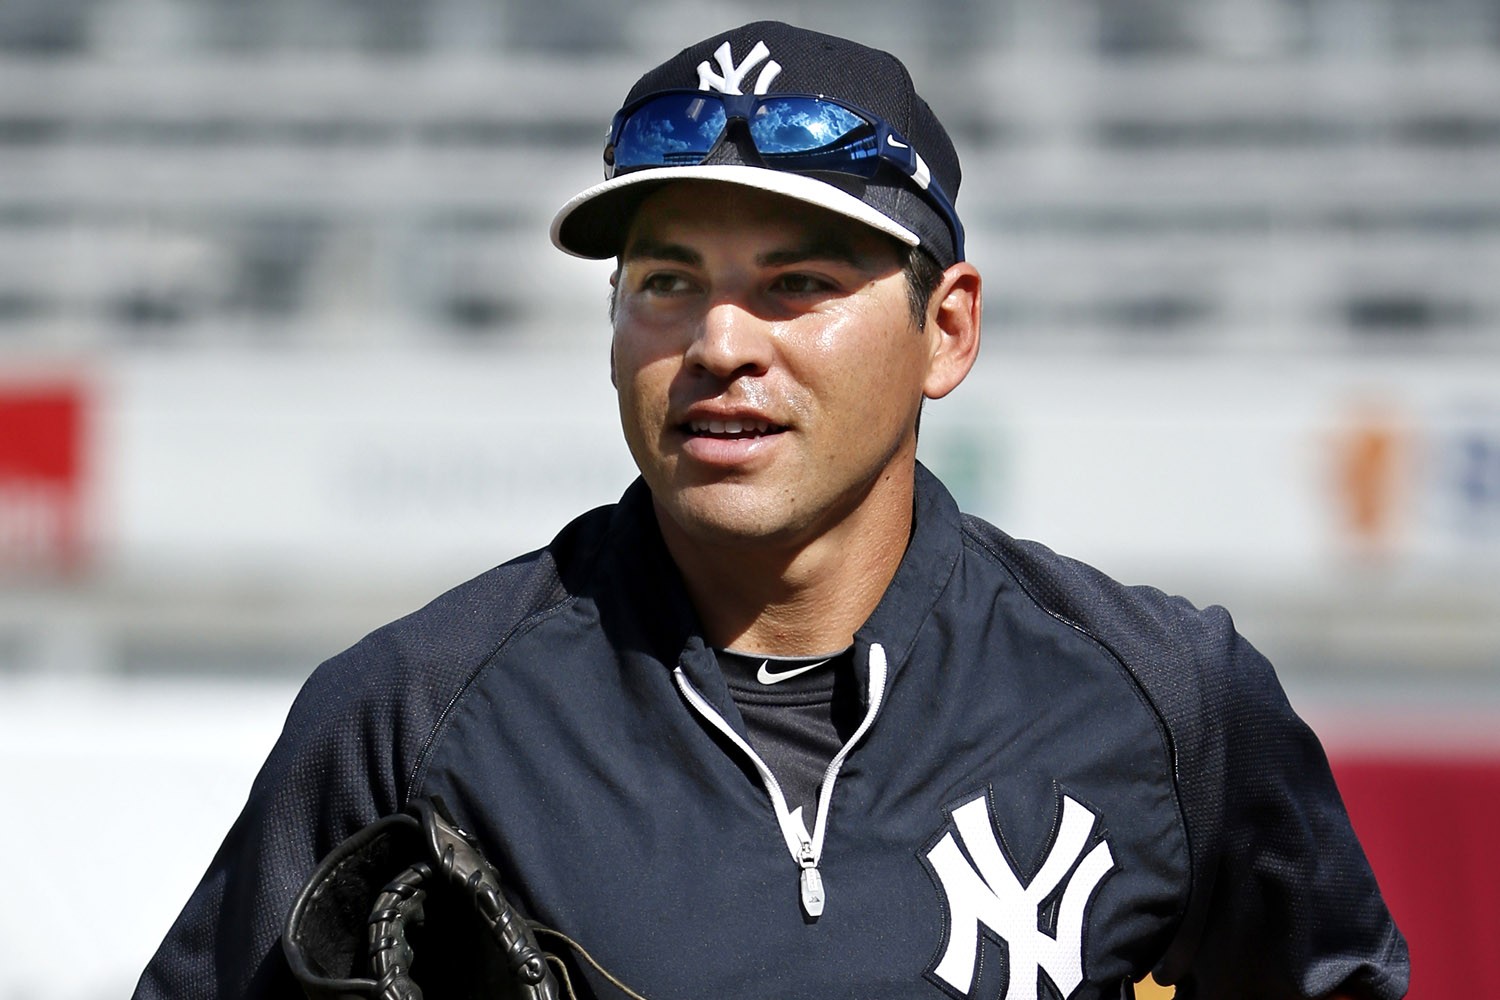 Former Red Sox outfielder Jacoby Ellsbury released by Yankees